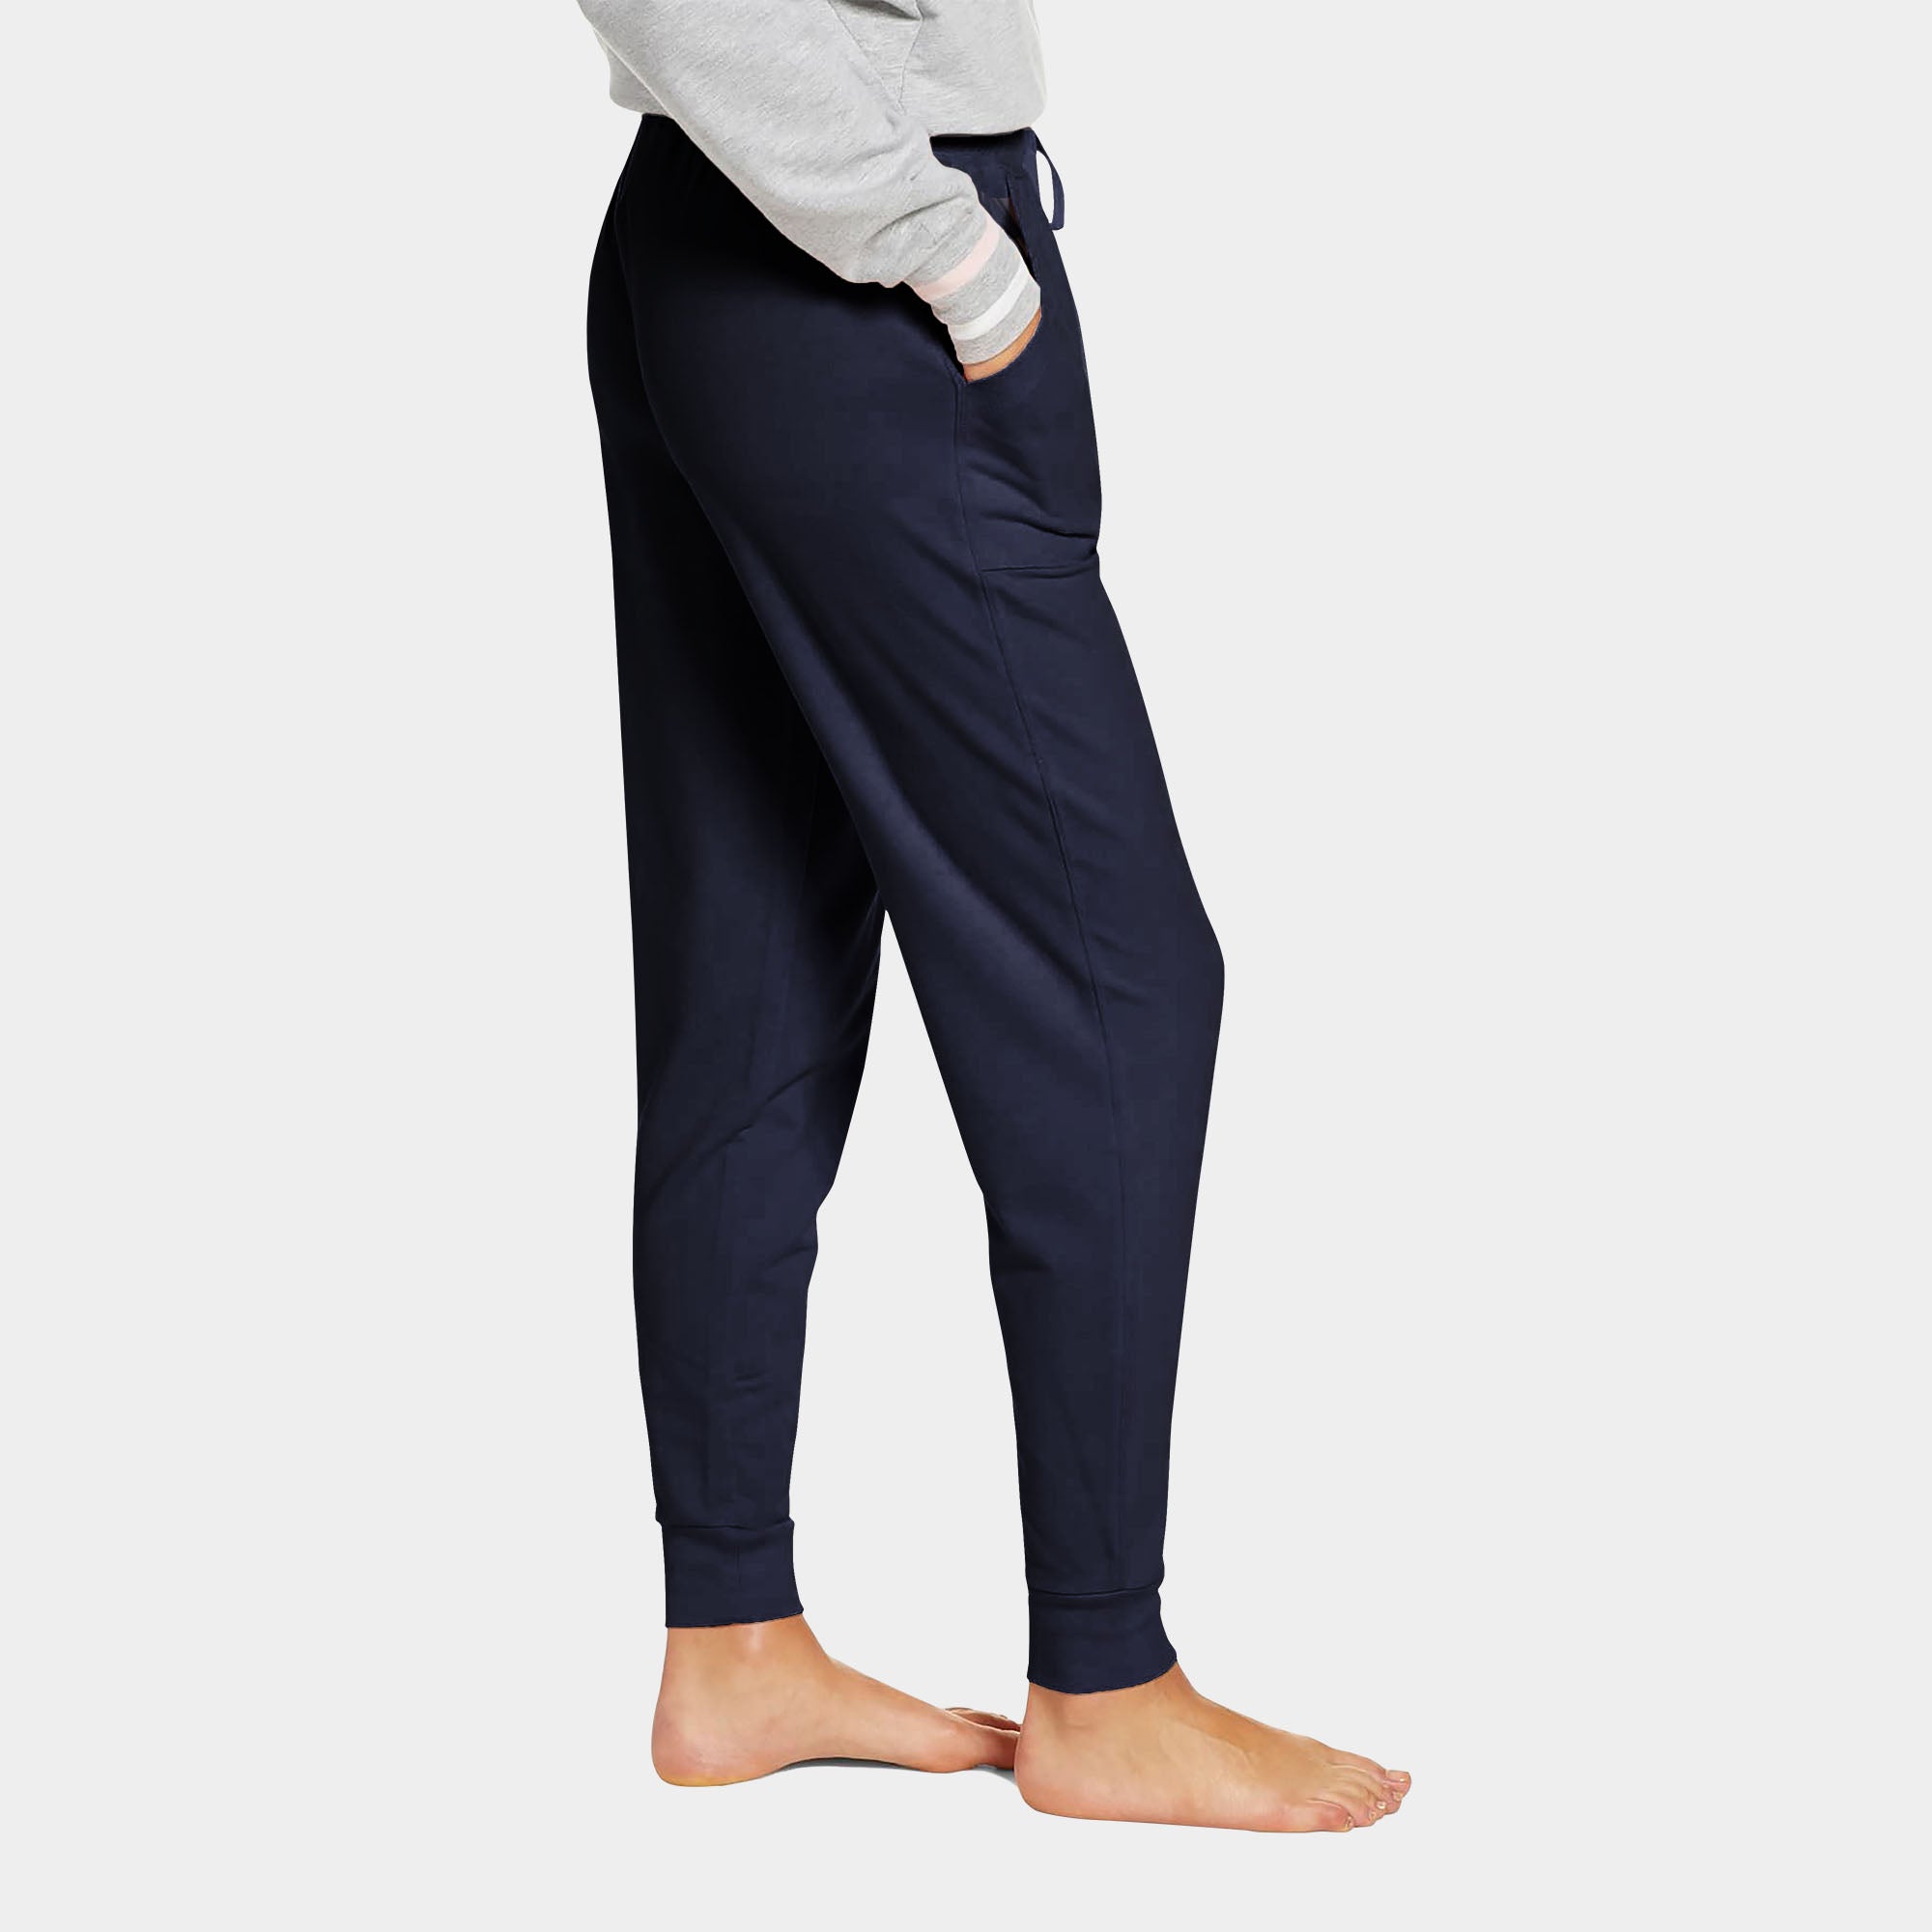 womens fleece sweatpants_yoga joggers_plush inner lining comfort_ribbed cuffs_lady_ladies_sweat for women_activewear_fleece_workout_exercise_weight_pilates_outdoor_indoor_at home_training_running_jogging_hiking_colorfulkoala joggers_yesler_amormio sweatpants_champion_beyond_yoga joggers_nike_rally white_nude sweatpants_lipservice pants_lounge around tan_hanes_teal_fancy_capri_love_french terry_light christmas cotton_Navy